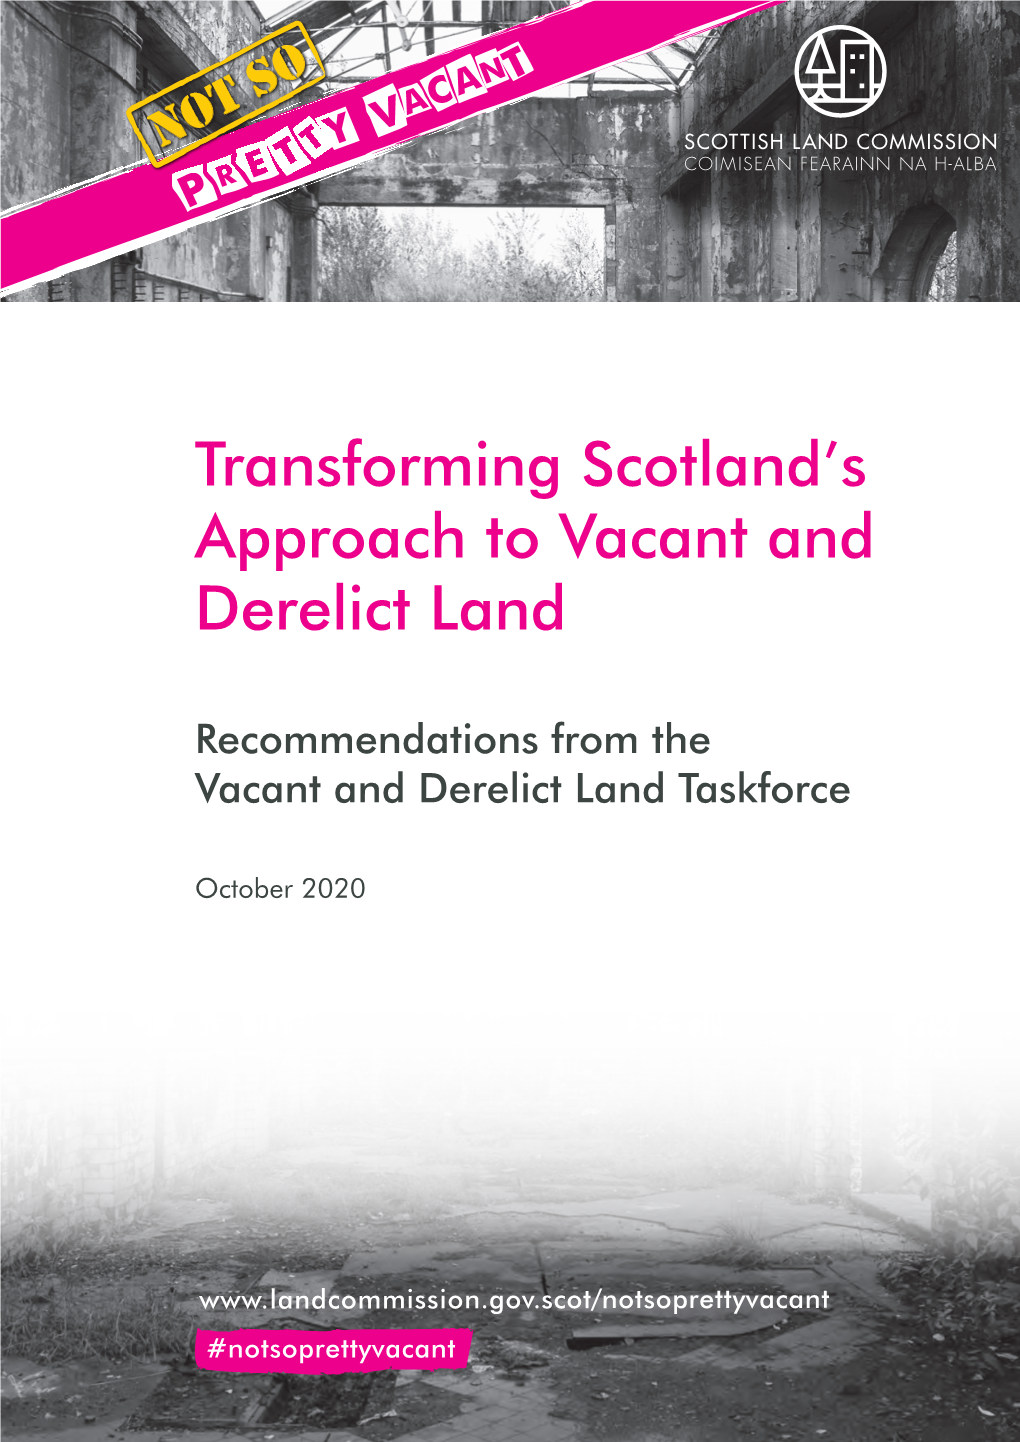 Transforming Scotland's Approach to Vacant and Derelict Land